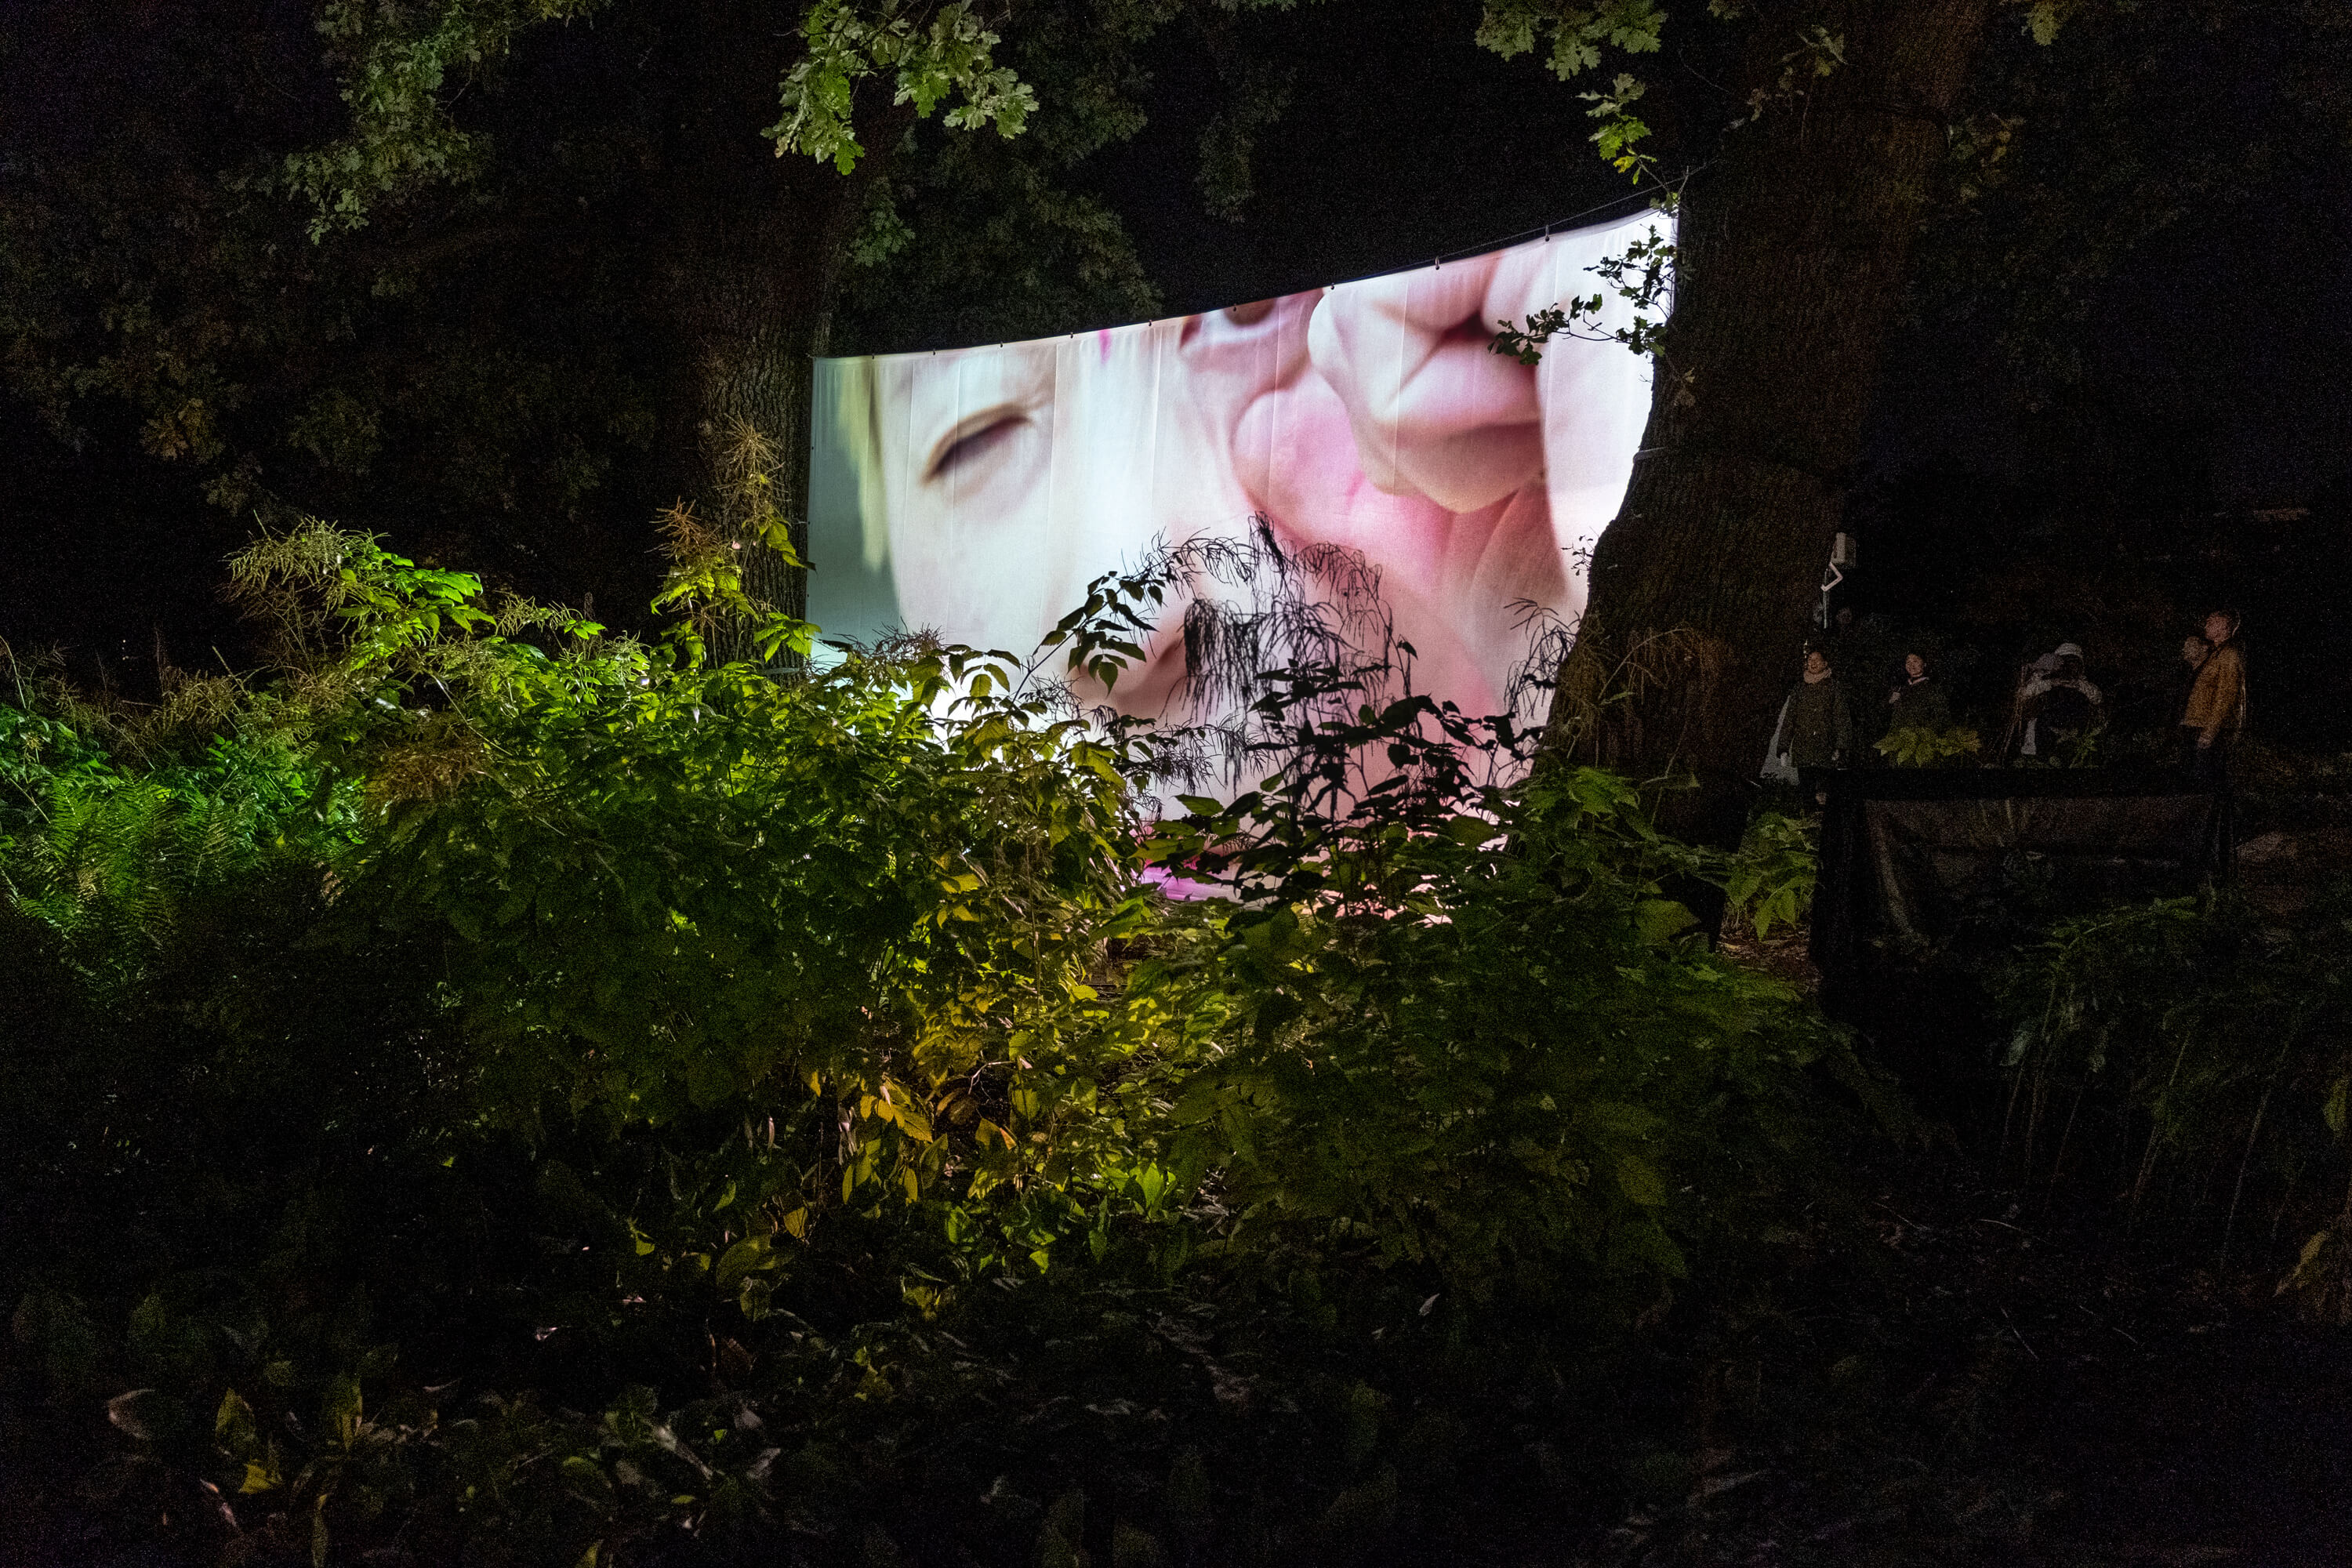 Installation at Planten un Blomen park in Hamburg by Hiền Hoàng, featuring large-scale video projections on towering trees. The immersive experience comprises three distinct screens, each showcasing a different film from the 'Scent from Heaven' project. The videos explore themes of tree’s suffering, human’s dream of healing and salvation and sensory perception, enveloping viewers in a mesmerizing blend of sight and sound amidst the natural surroundings of the park.